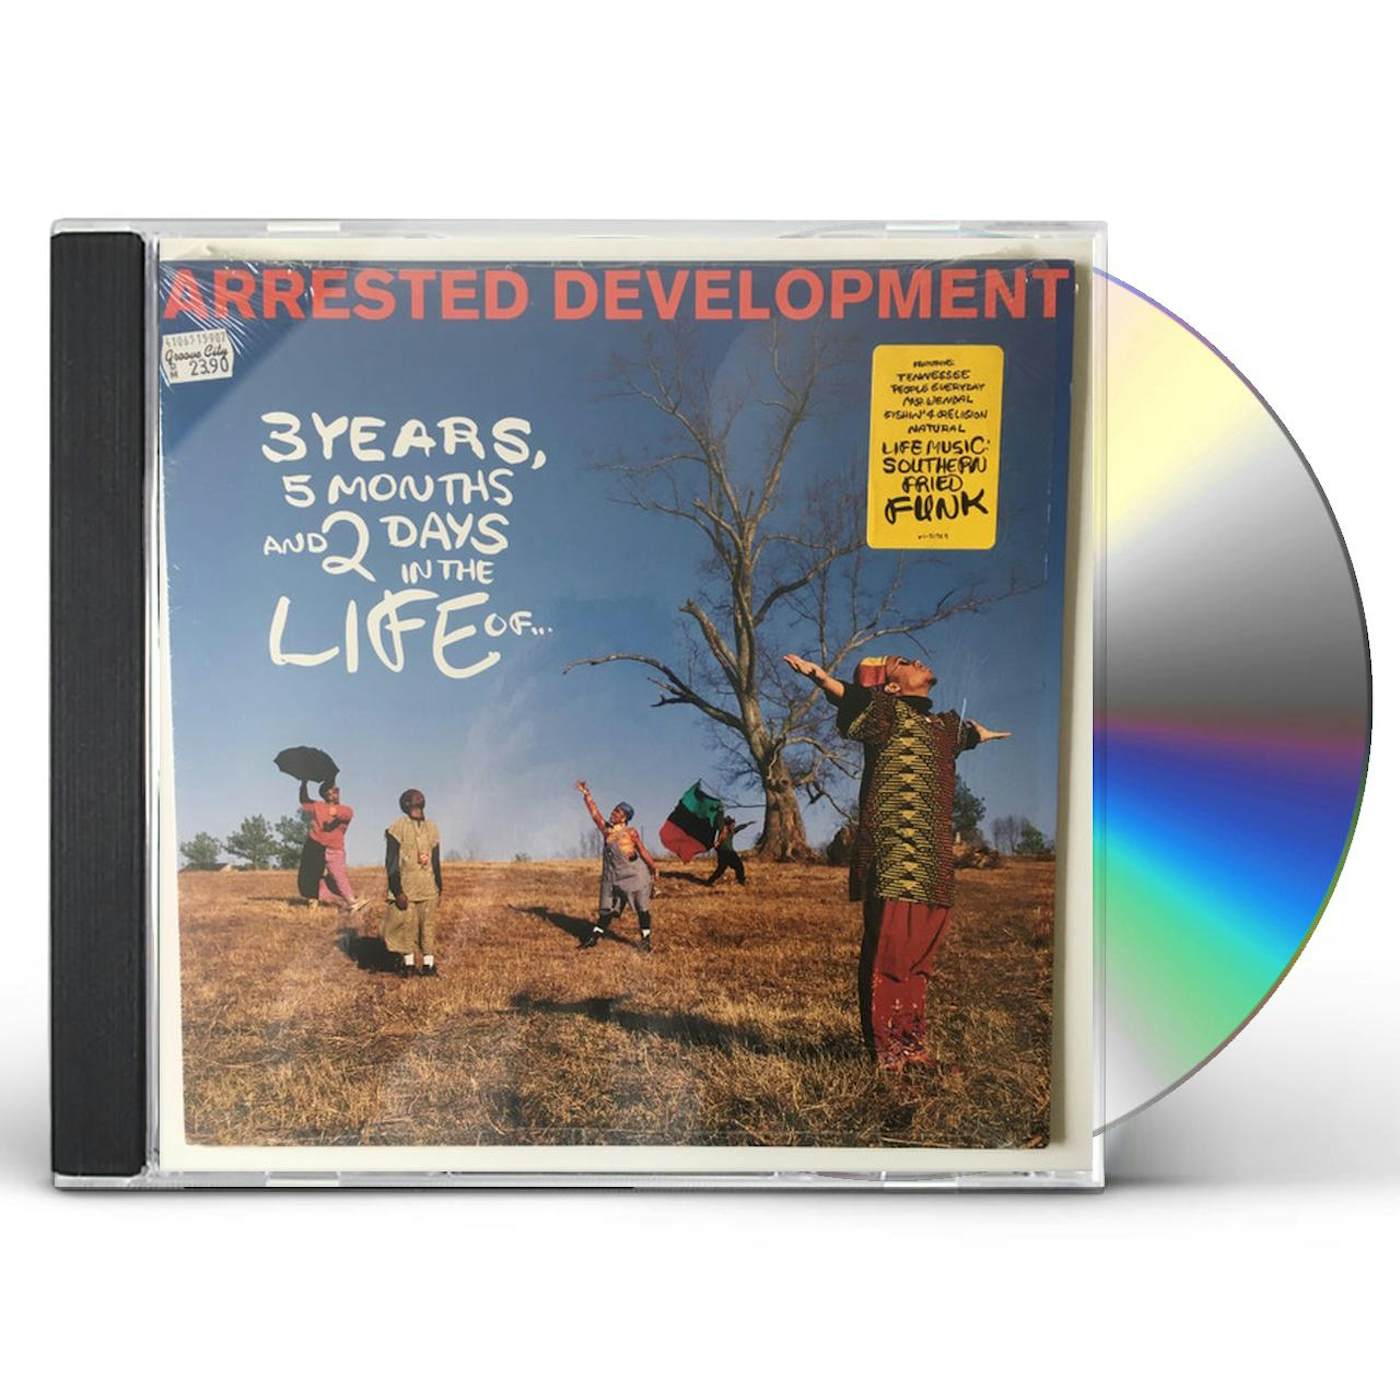 Arrested Development 3 YEARS 5 MONTHS & 2 DAYS IN THE LIFE OF CD